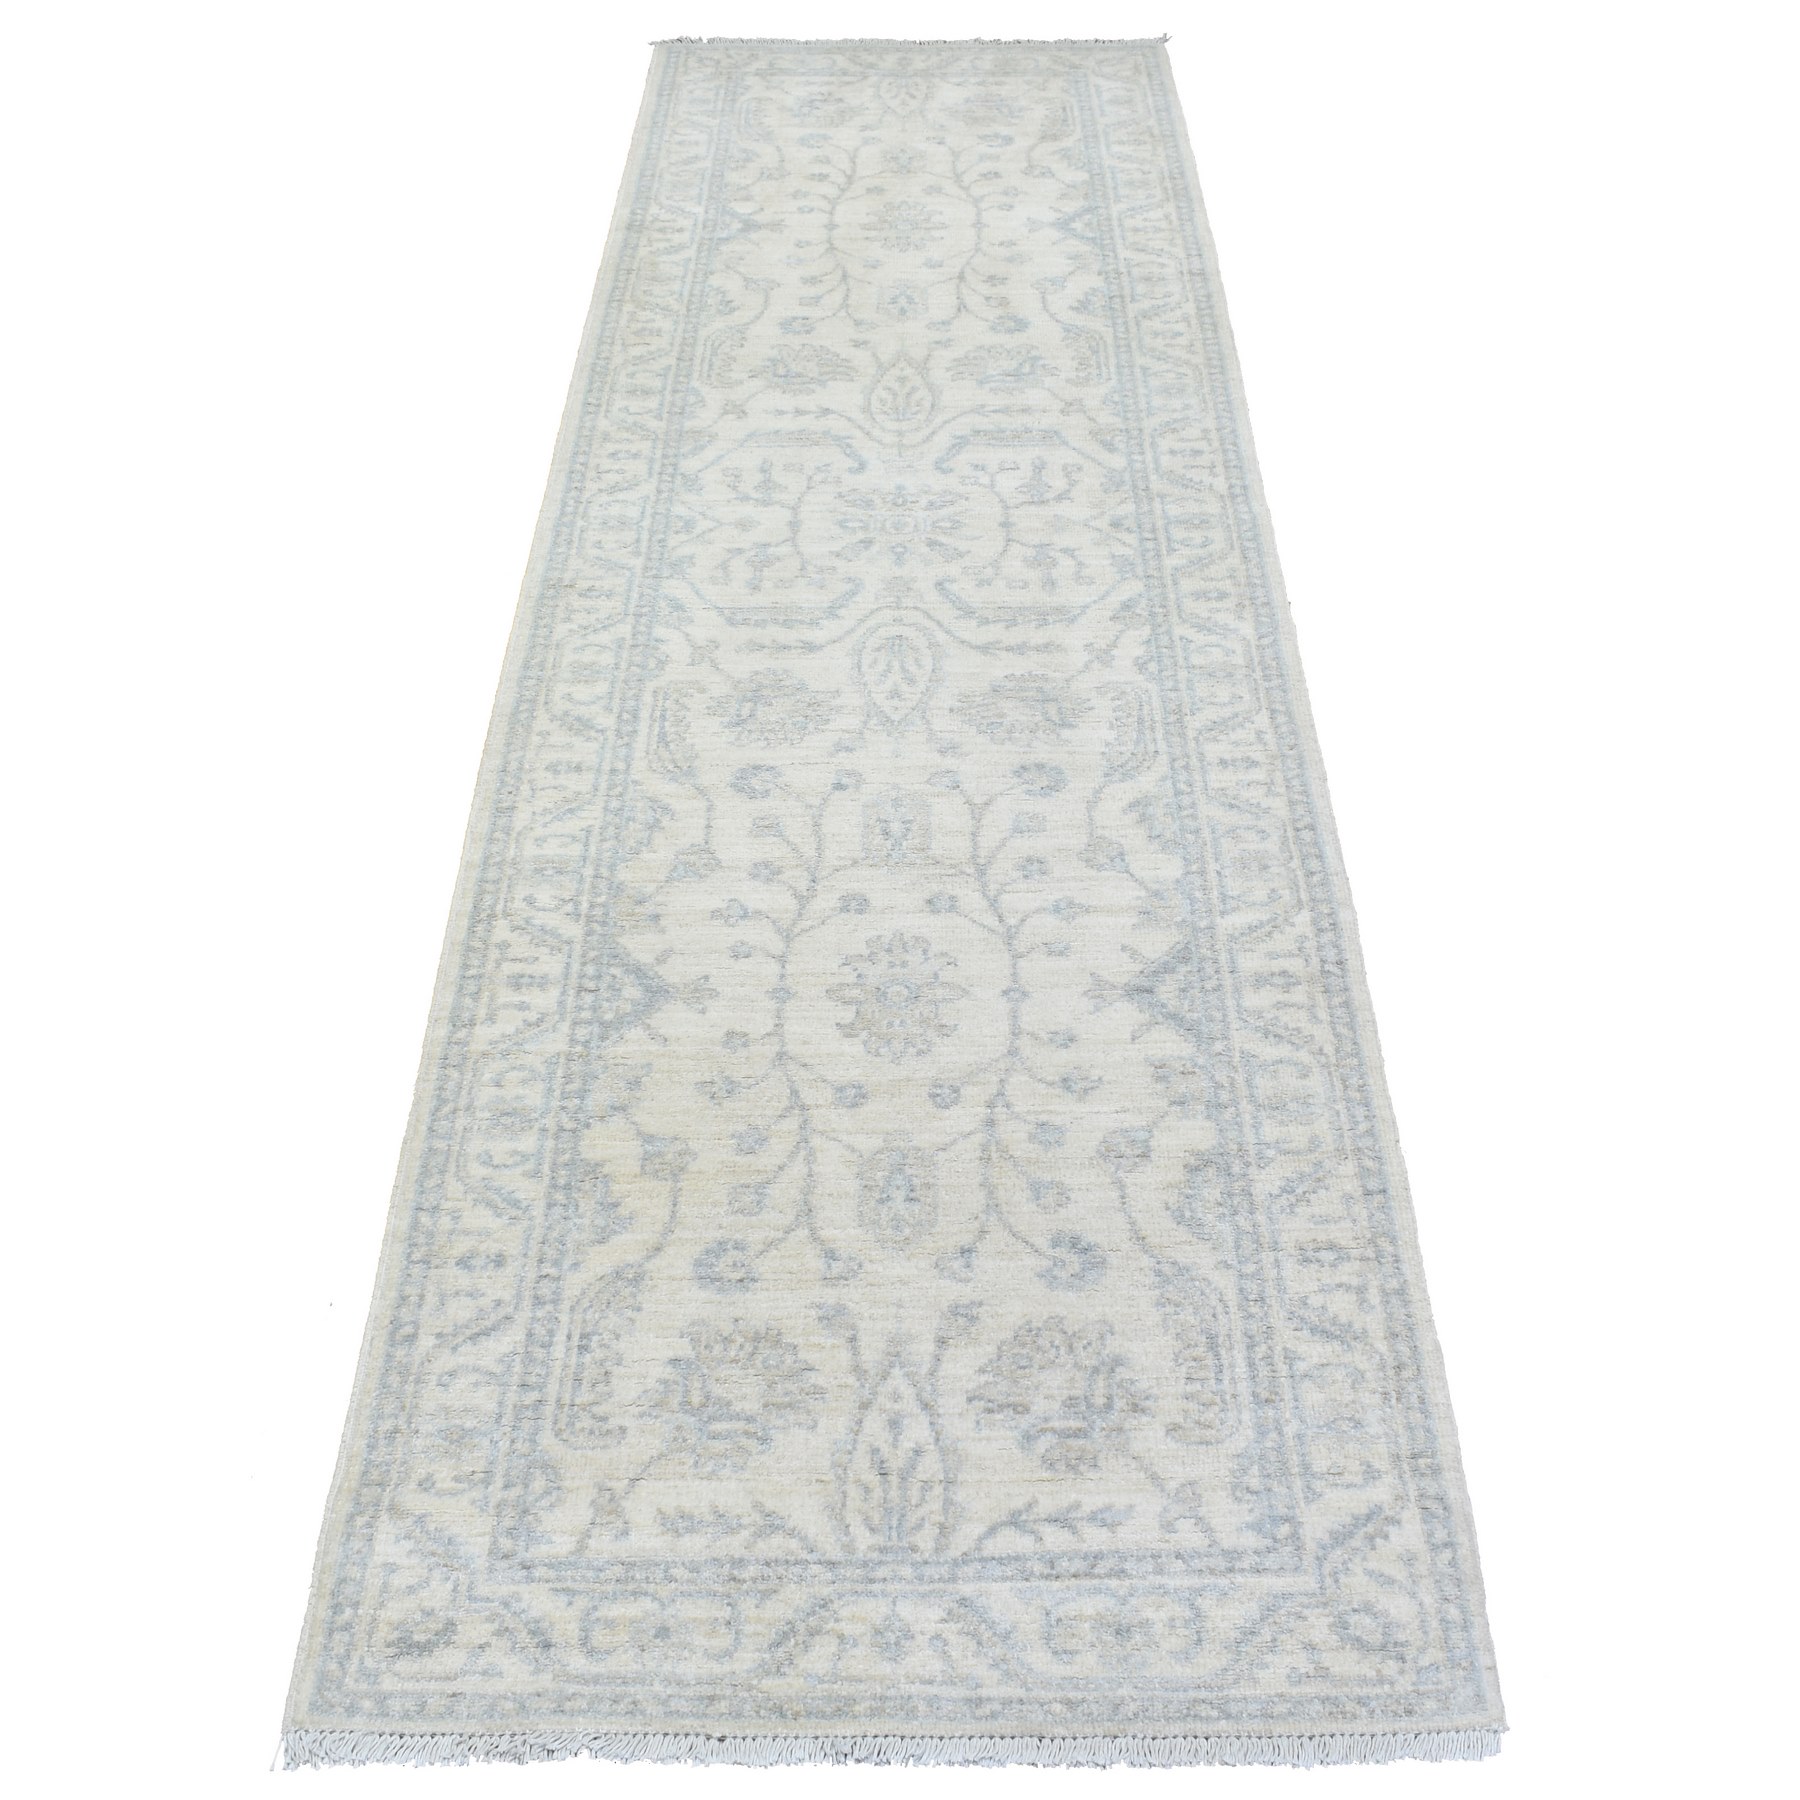 2'9"x9'4" Ivory, White Wash Peshawar with All Over Mahal Design Natural Dyes, Extra Soft Wool Hand Woven, Runner Oriental Rug 